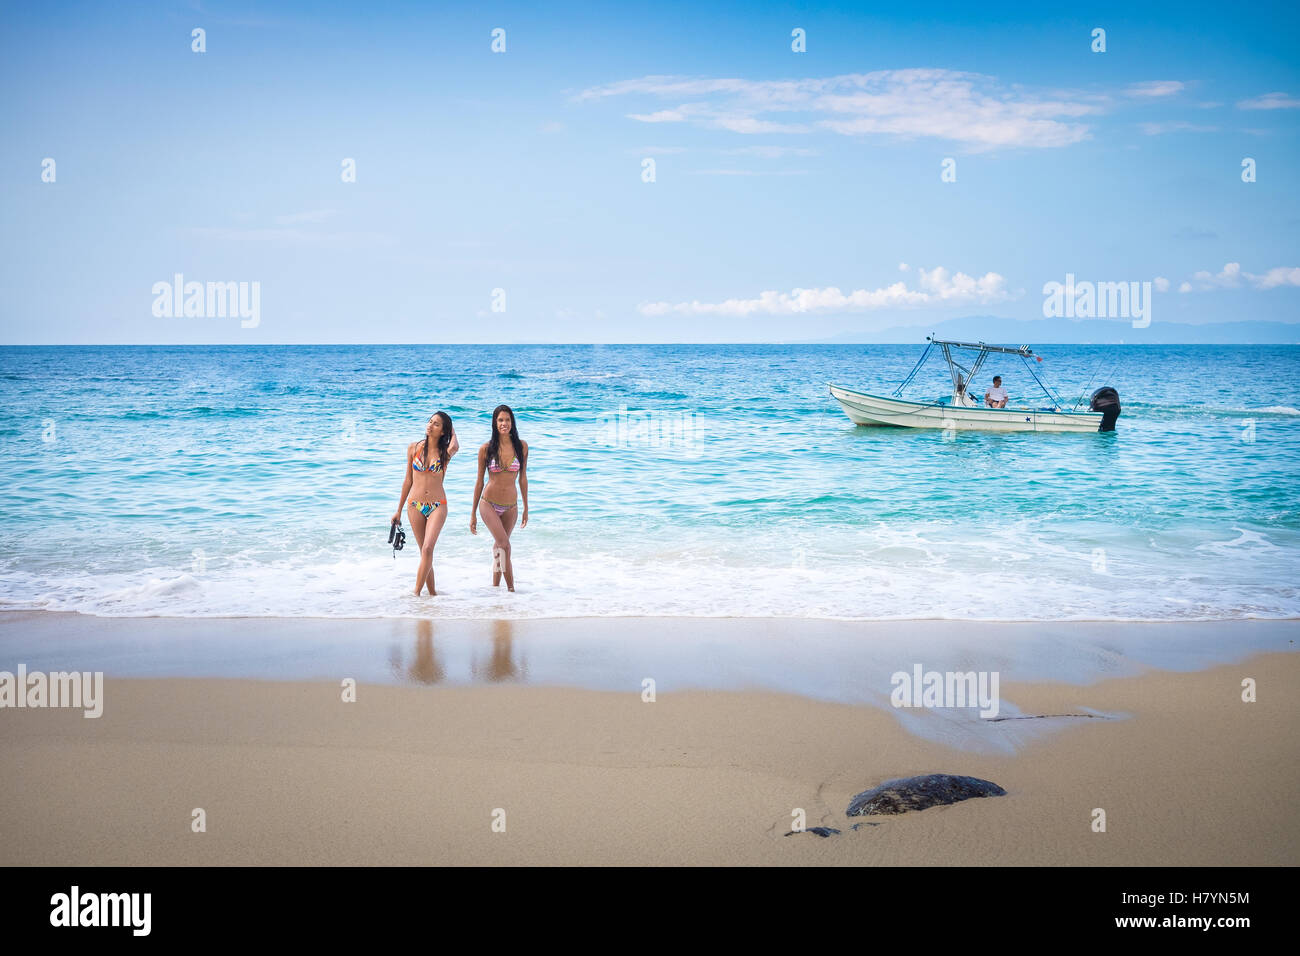 Beach scene with two attractive latina women stepping out of the ocean. Fishing boat in the background. Banderas Bay - Pacific O Stock Photo